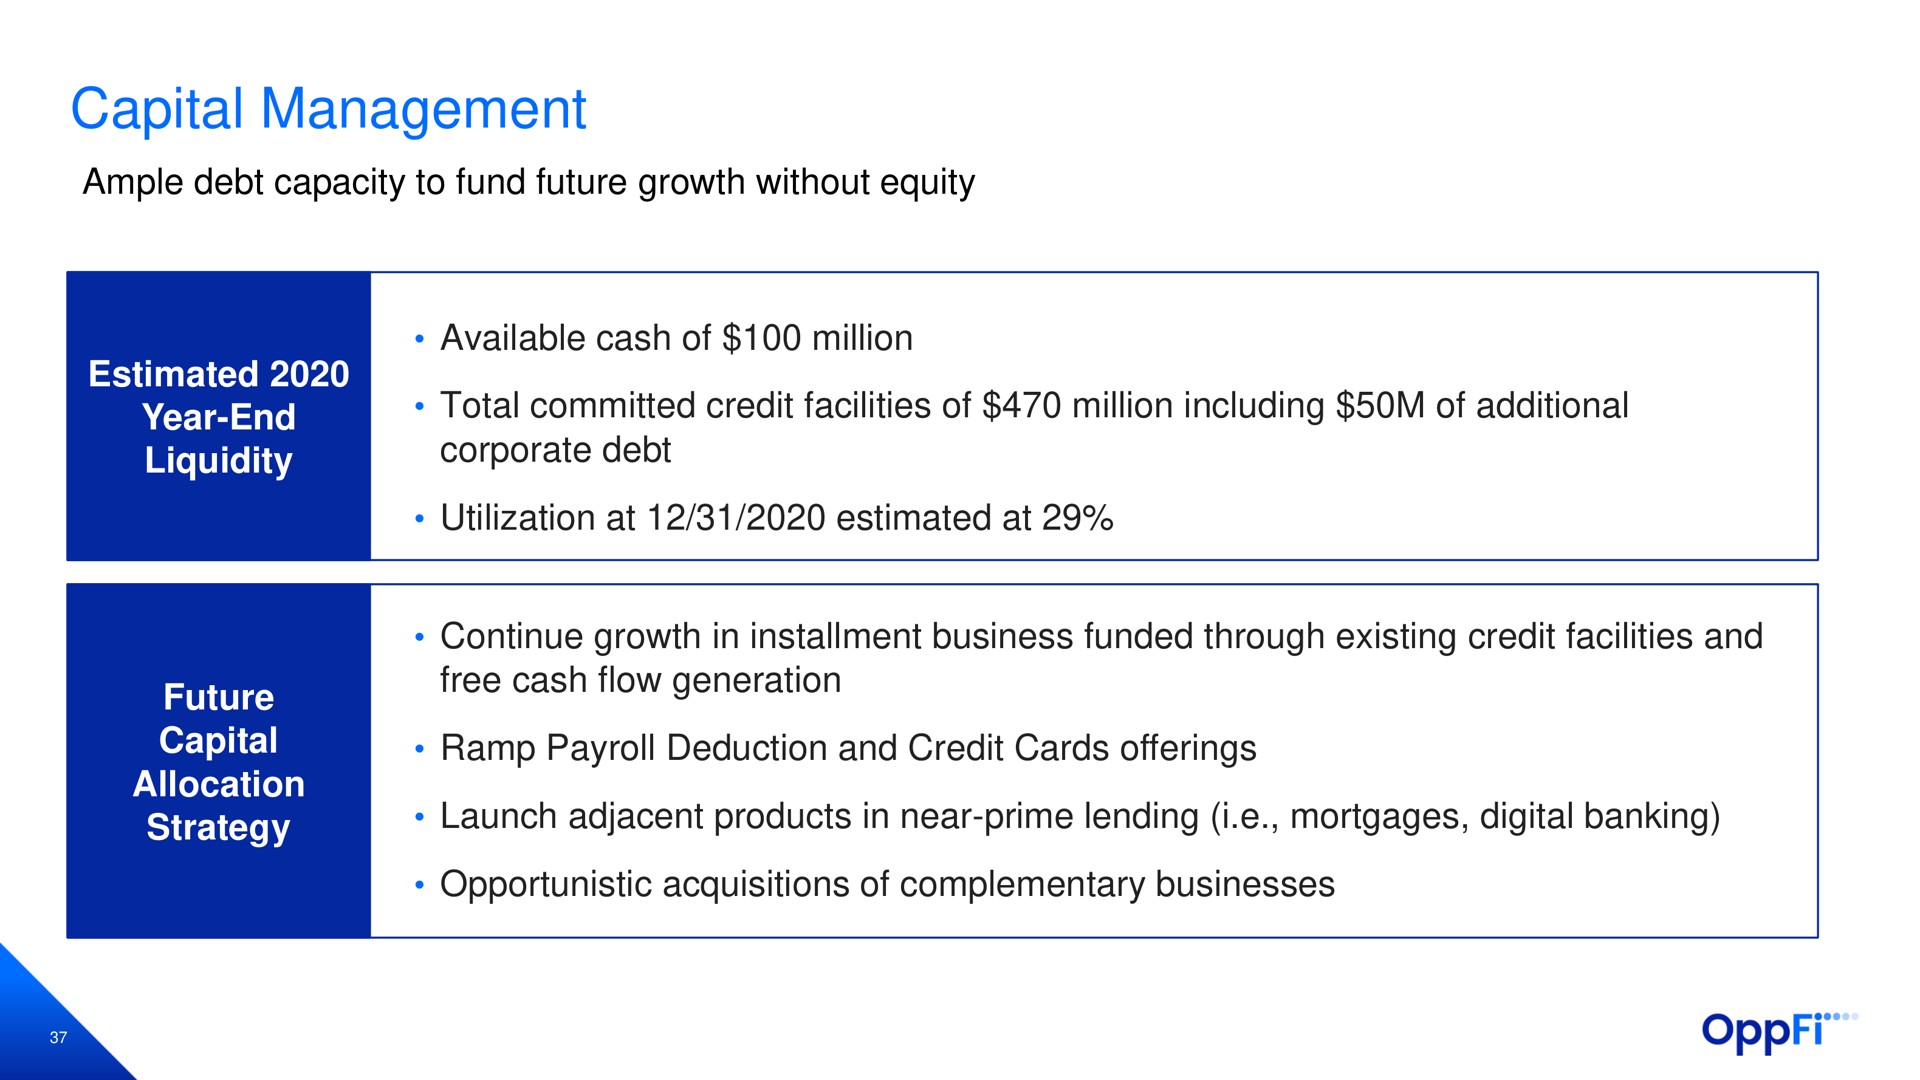 capital management ample debt capacity to fund future growth without equity available cash of million estimated year end liquidity total committed credit facilities of million including of additional corporate debt utilization at estimated at future capital allocation strategy continue growth in installment business funded through existing credit facilities and free cash flow generation ramp payroll deduction and credit cards offerings launch adjacent products in near prime lending i mortgages digital banking opportunistic acquisitions of complementary businesses | OppFi